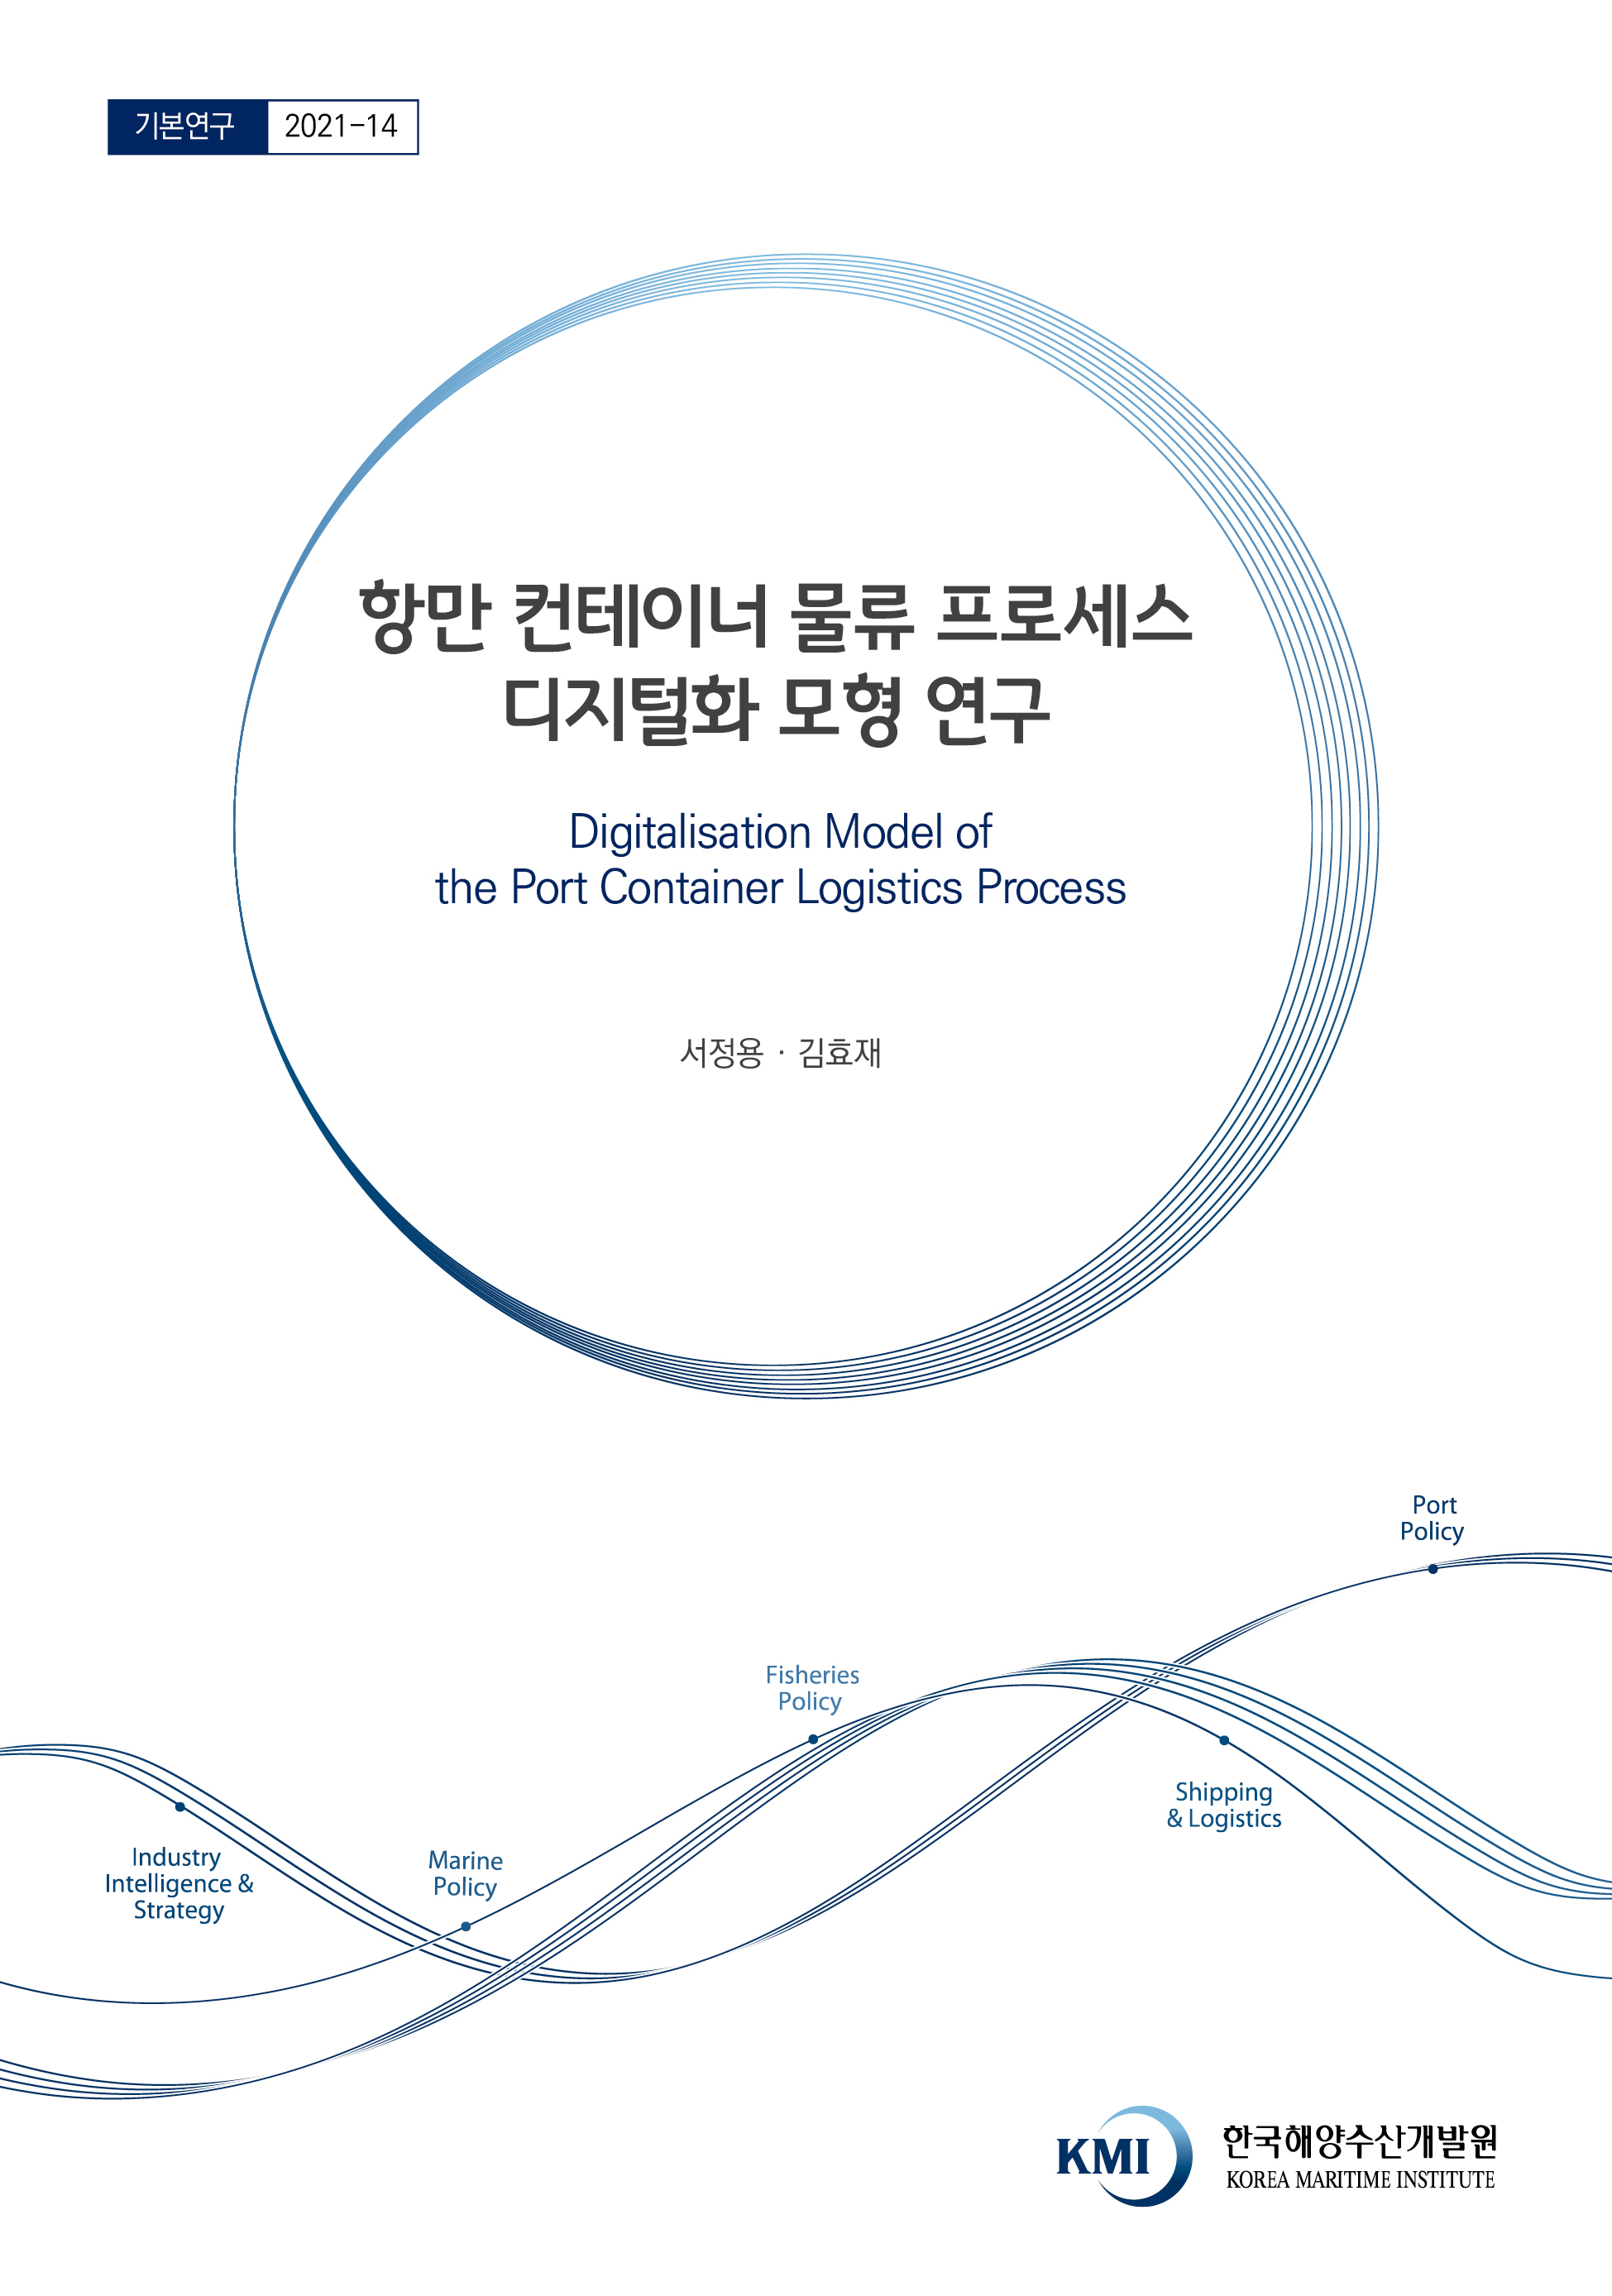 Digitalization Model of the Port Container Logistics Process